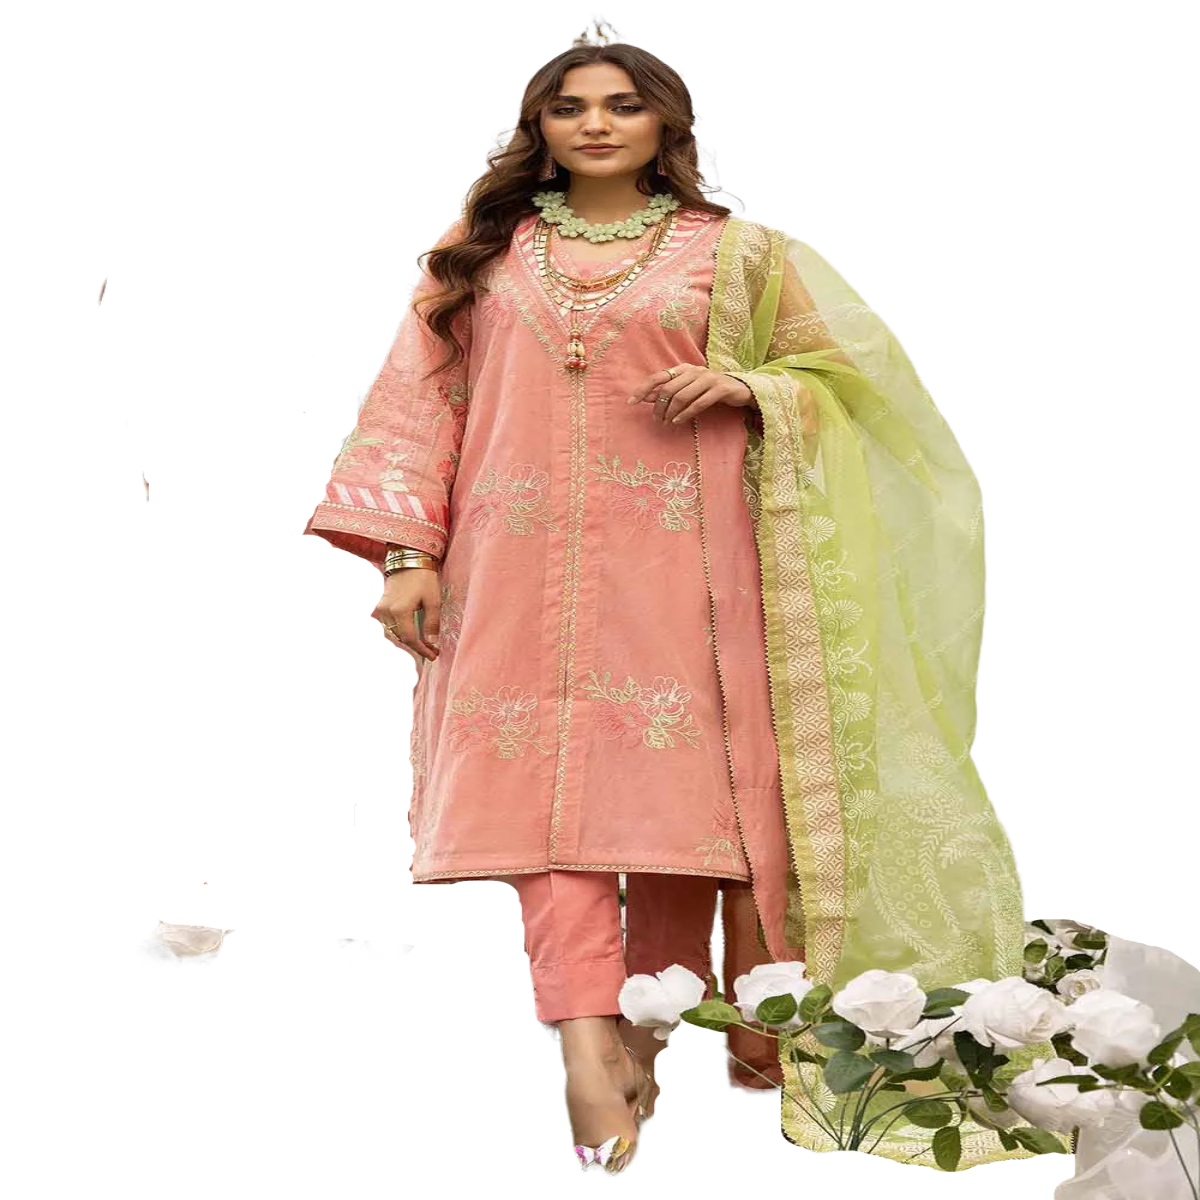 Gul Ahmed Dress for Women Embroidered Jacquard Unstitched 3-Piece Suit with Burnout Organza Dupatta FE-32048 - Askani Group